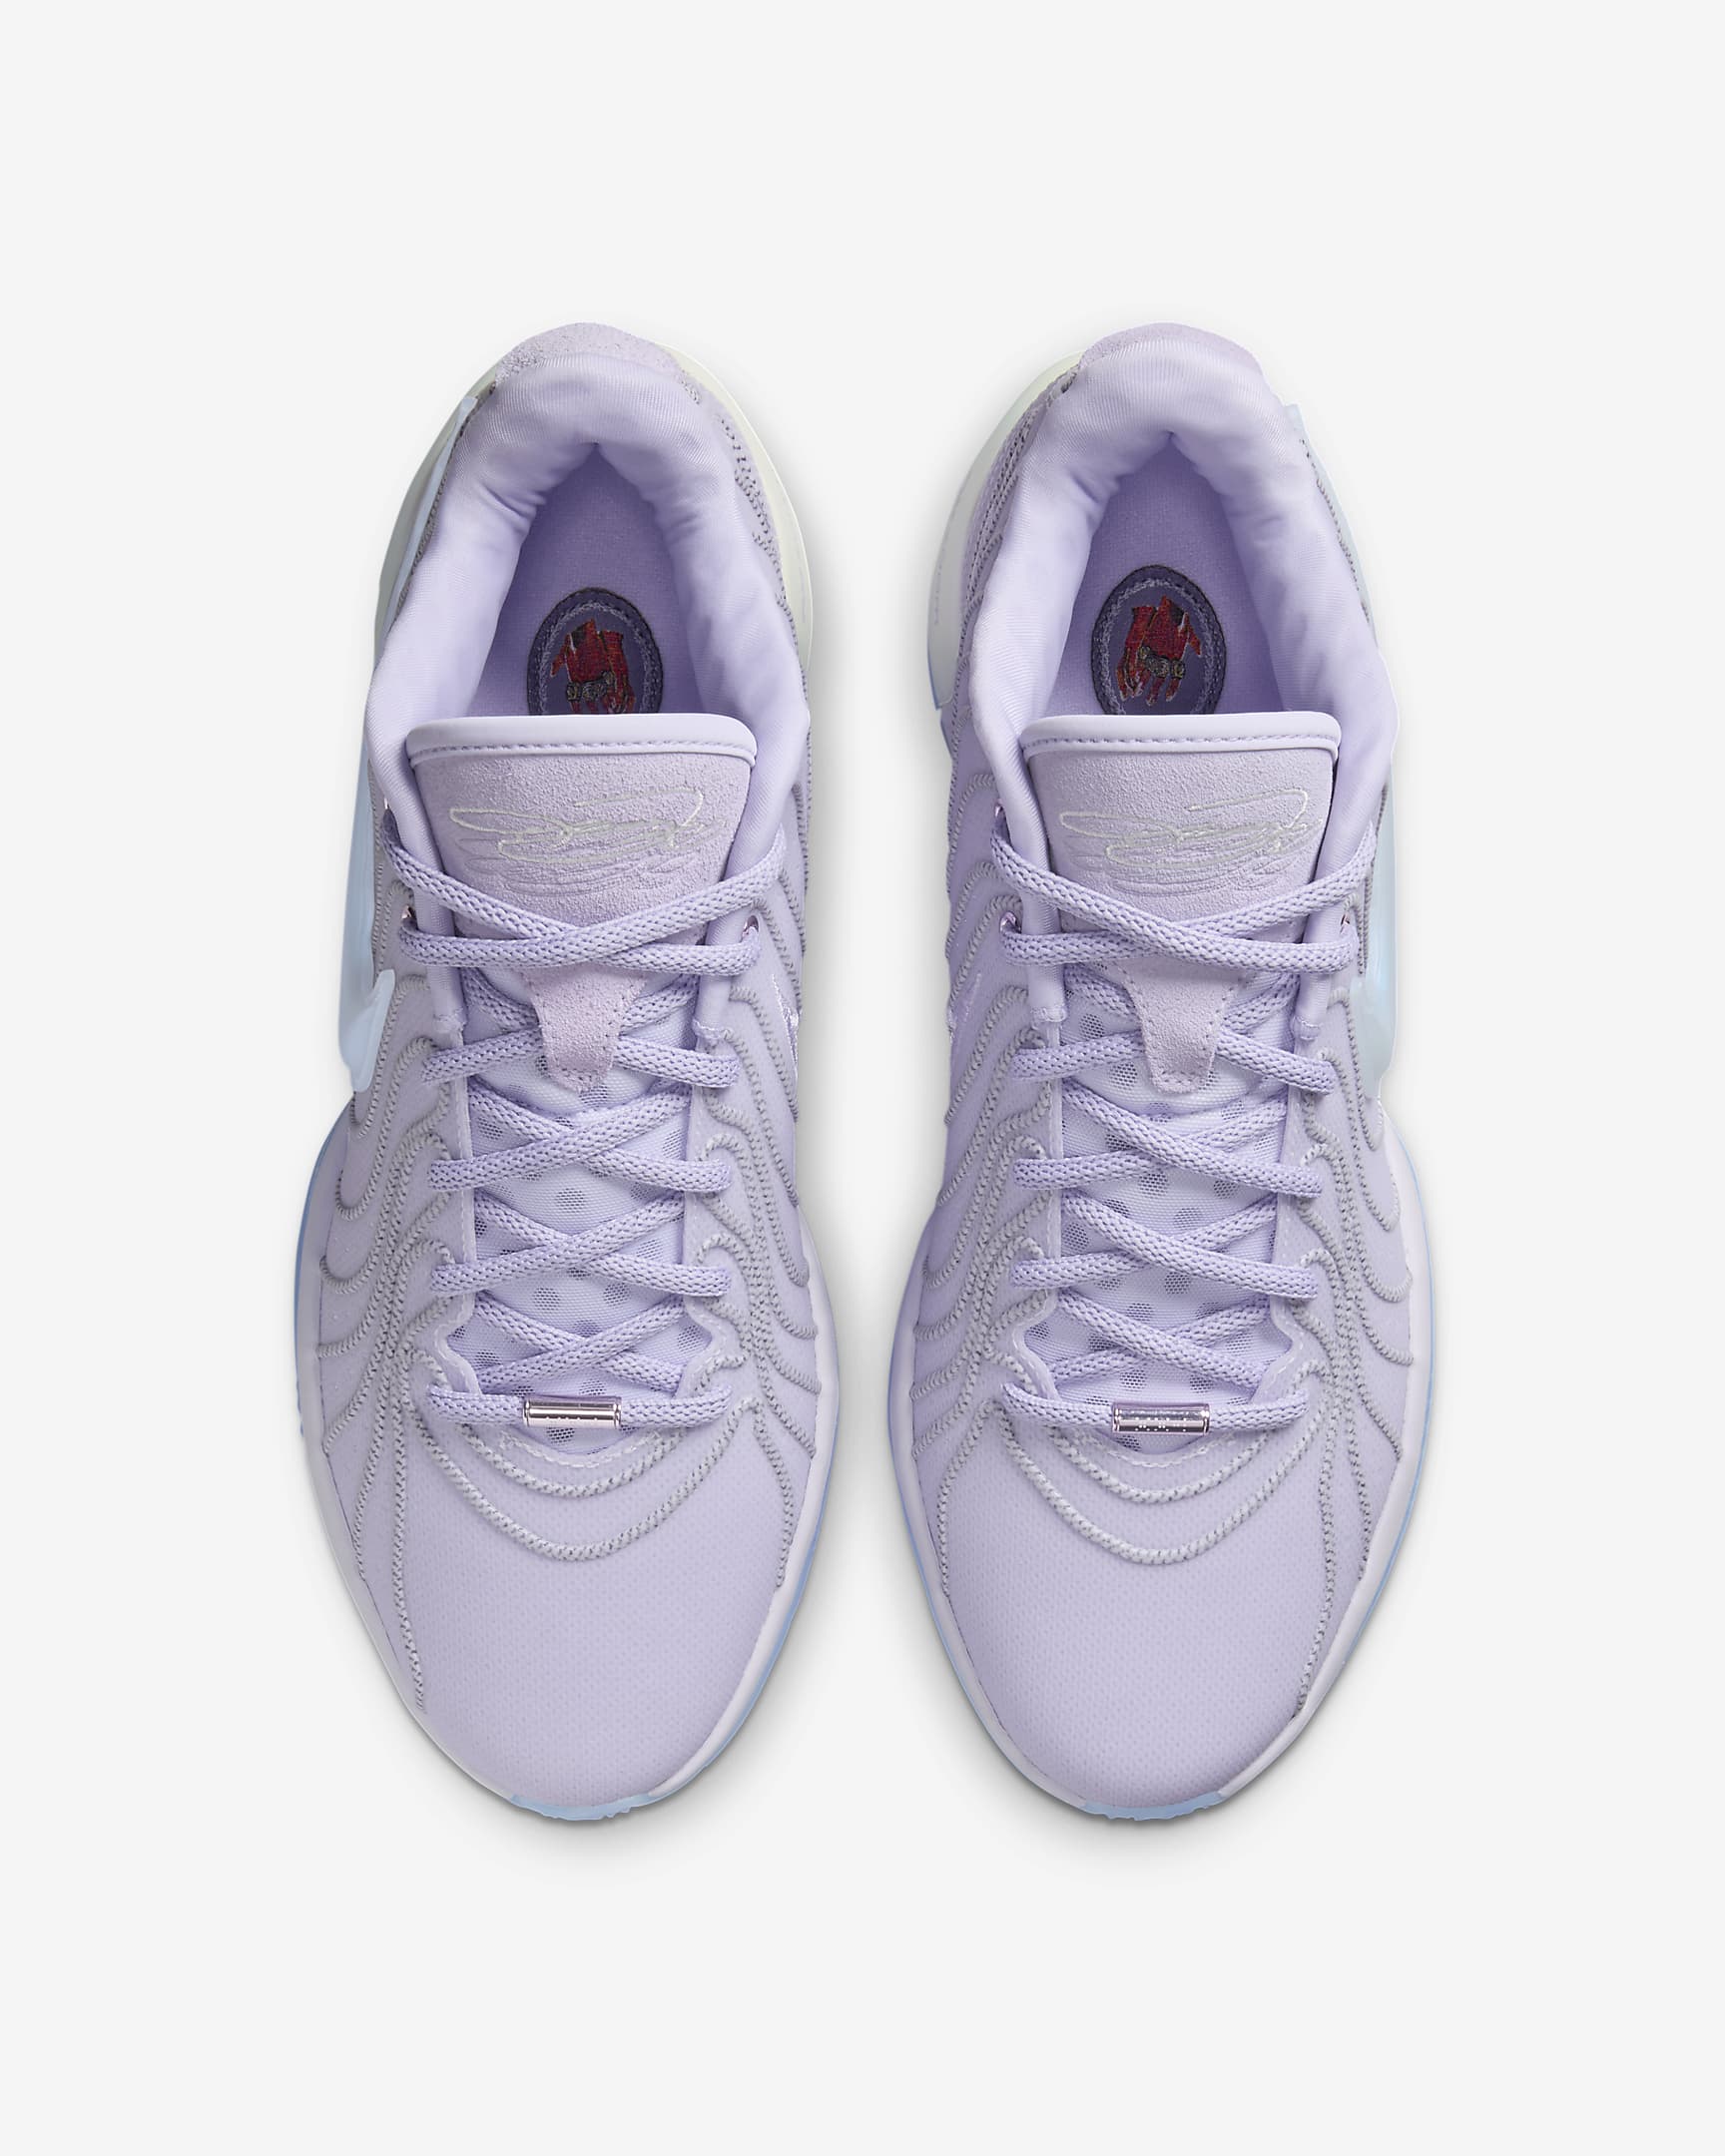 LeBron XXI Basketball Shoes - Barely Grape/Lilac Bloom/Summit White/Light Armoury Blue